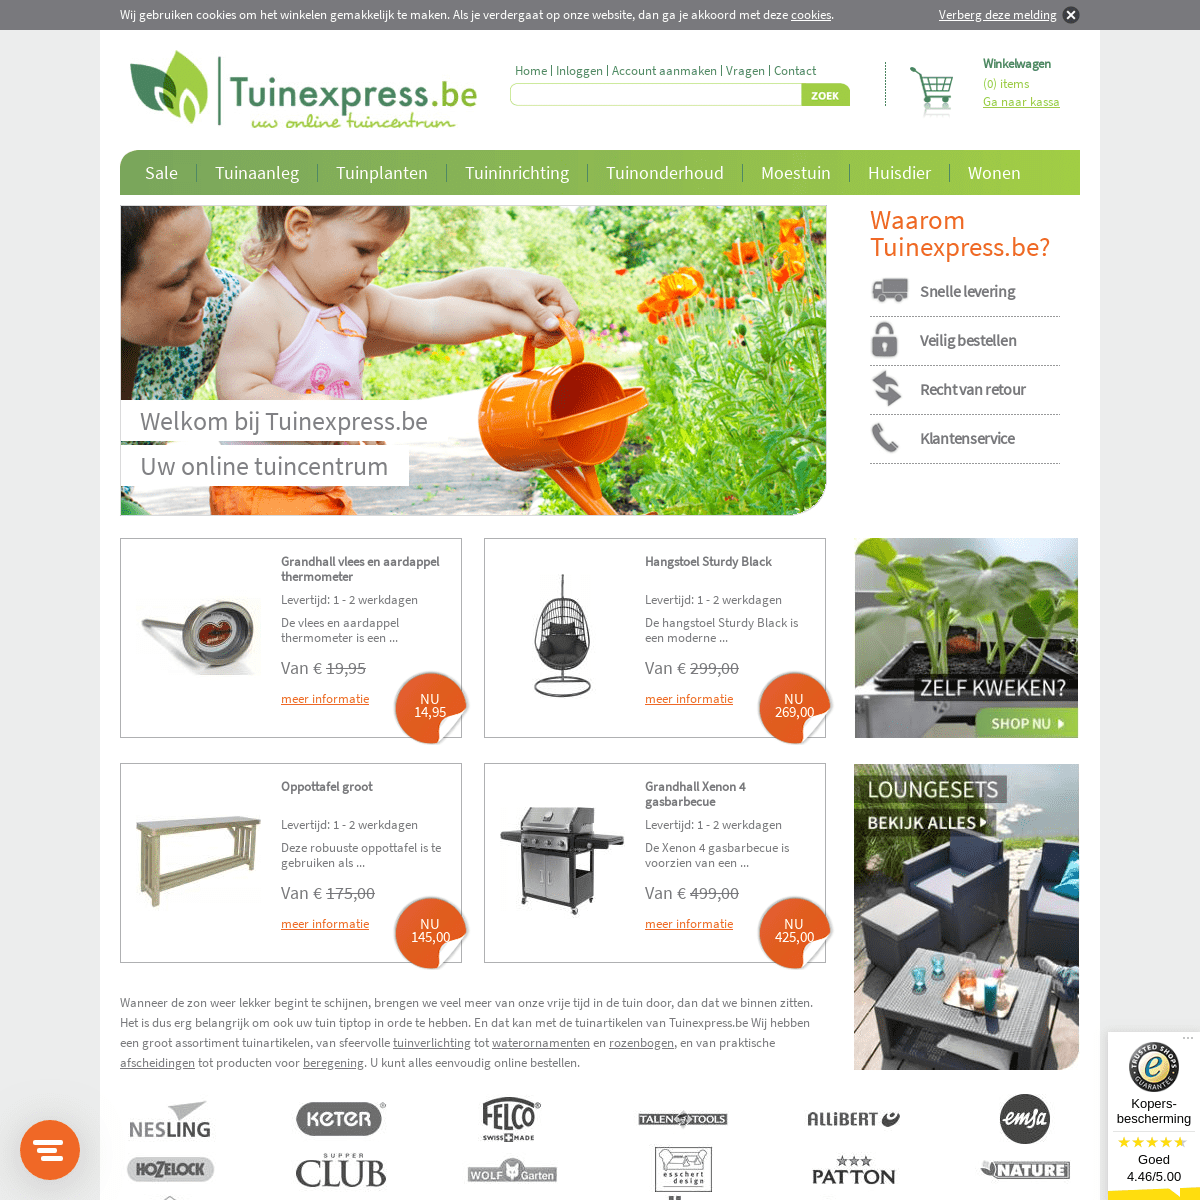 A complete backup of tuinexpress.be